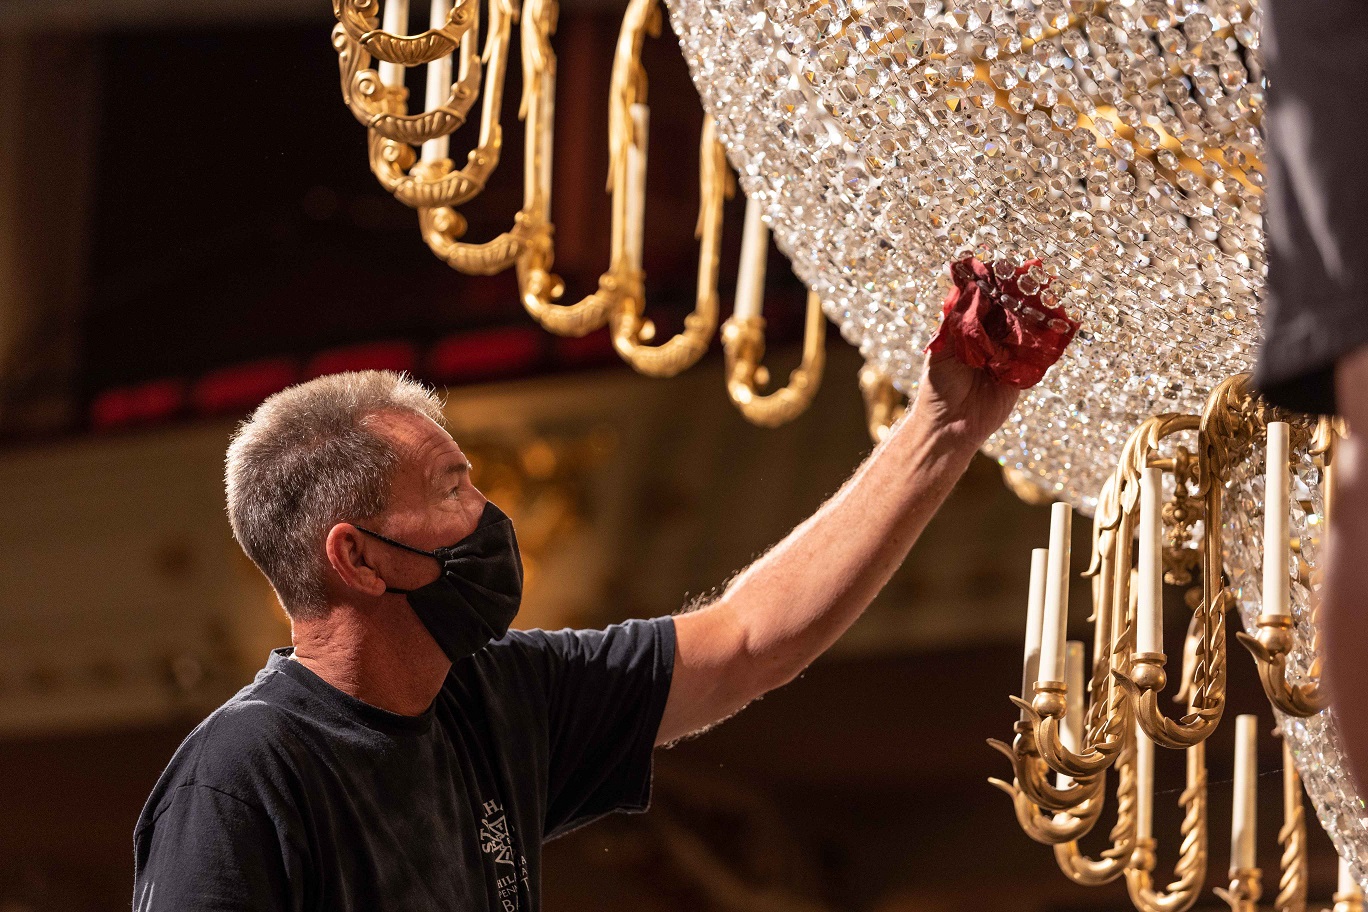 Get a behind-the-scenes look at how we keep all venues on our Kimmel Cultural Campus clean – including the grand Academy of Music chandelier!